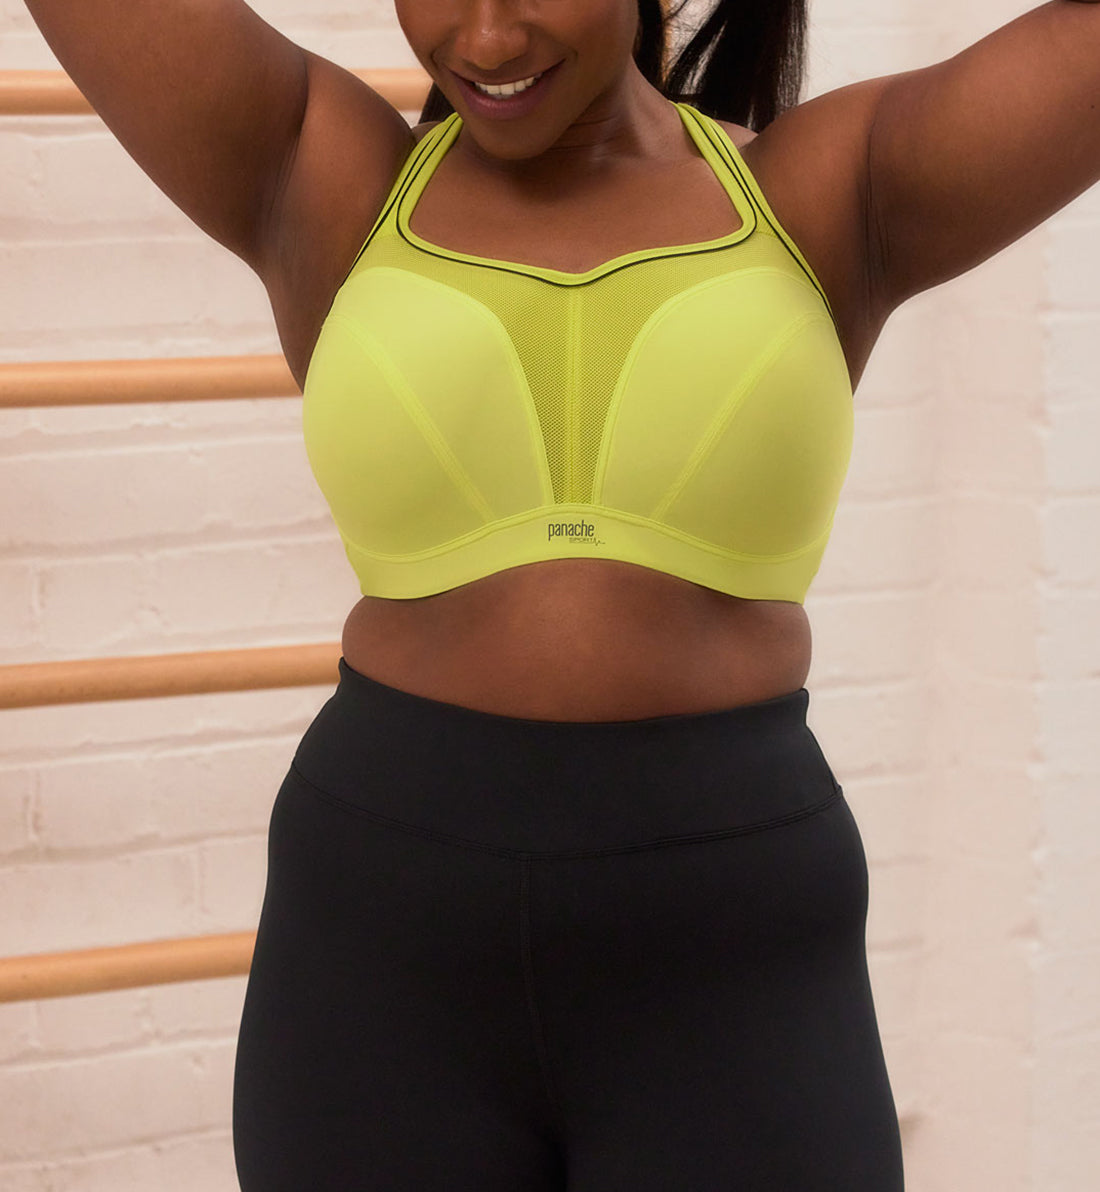 Breakout Bras - On the fifth day of giveaways Breakout Bras gave to me, a  customer favorite Panache sports bra FOR FREE! Win a Panache sports bra by  following these simple rules